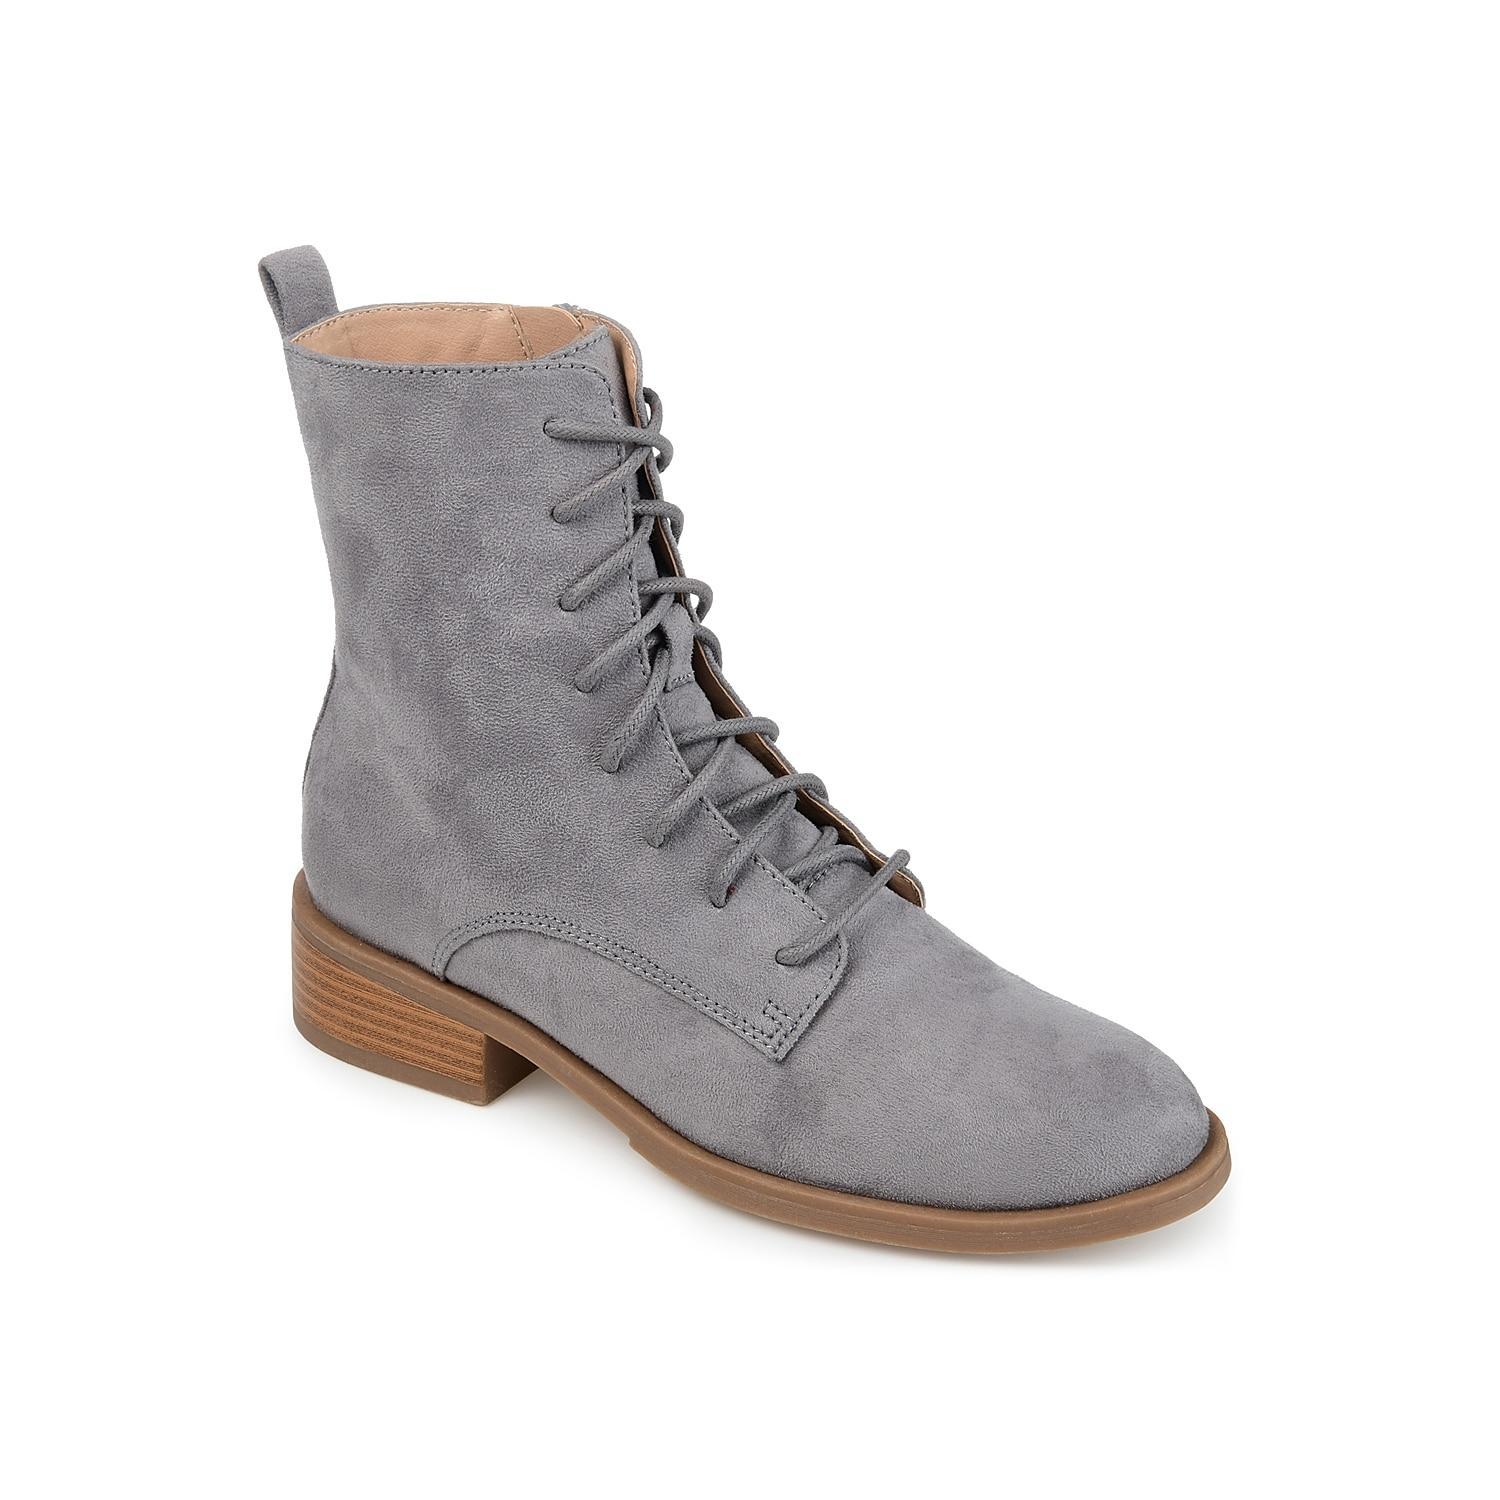 Journee Collection Vienna Womens Combat Boots Grey Product Image